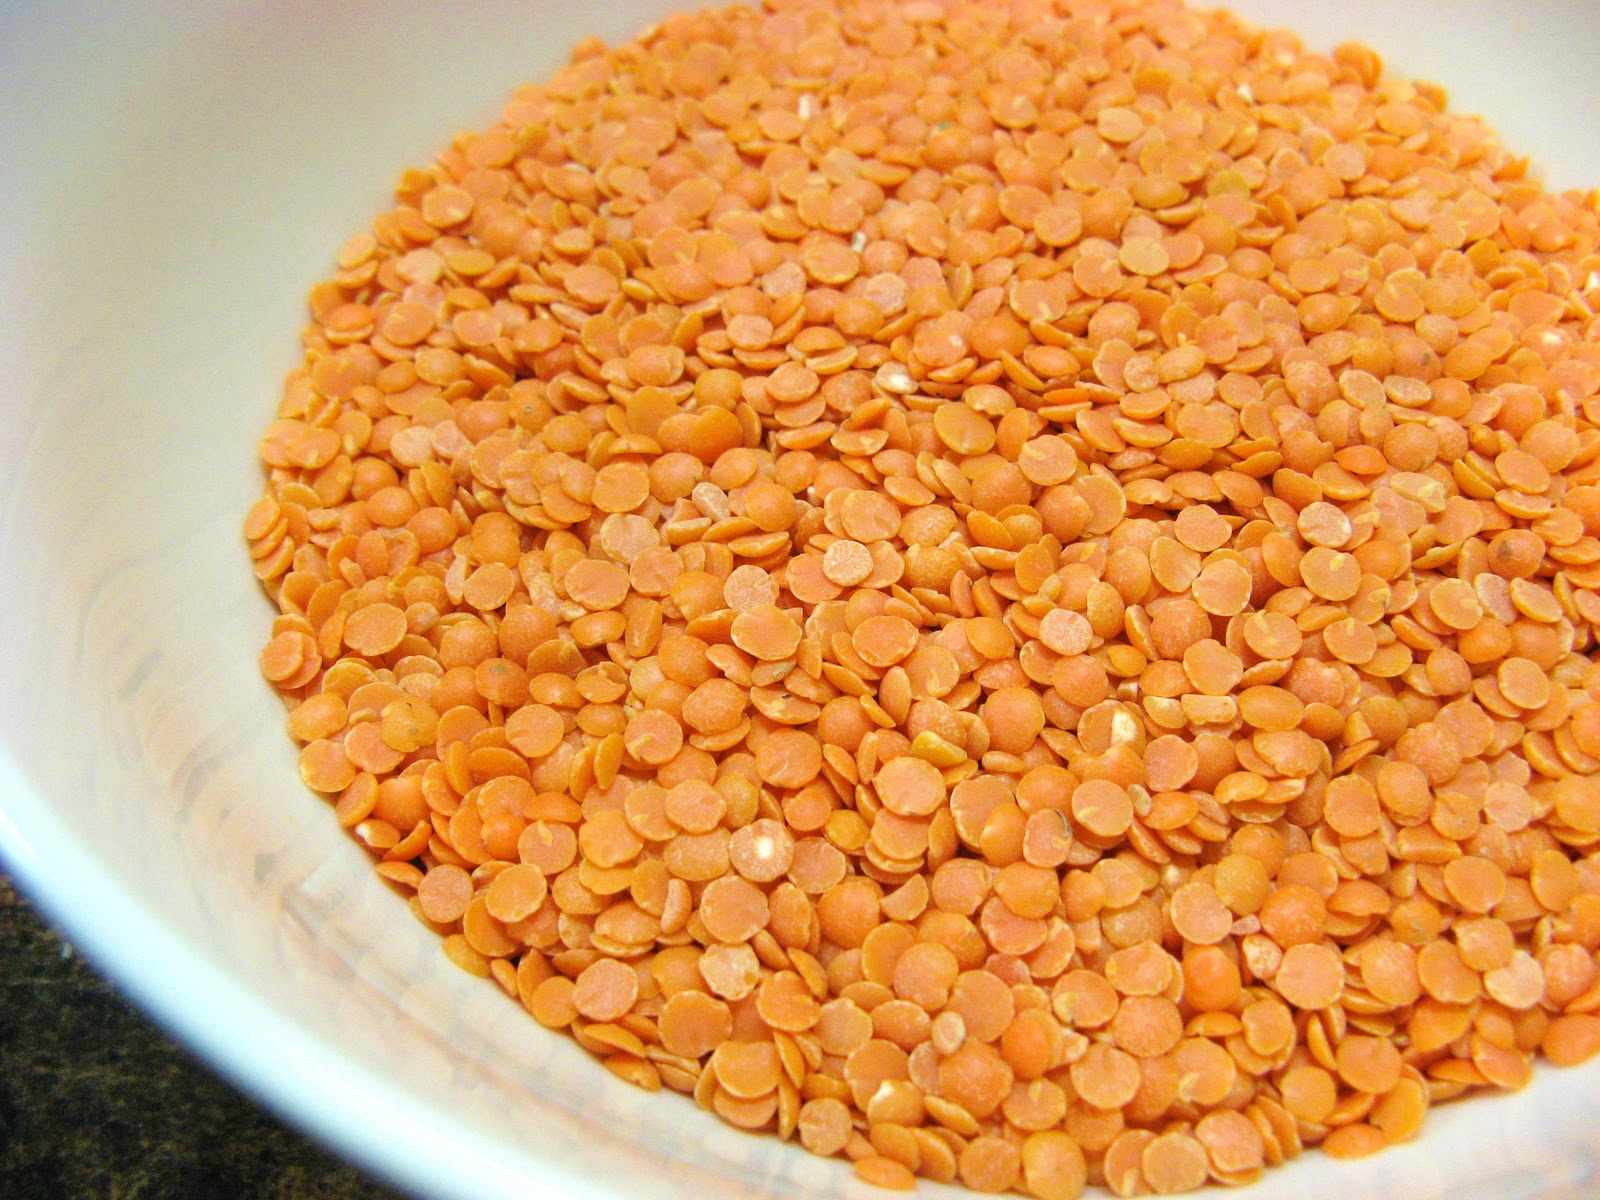 The Well-Fed Newlyweds: Red Lentils with Stewed Tomatoes